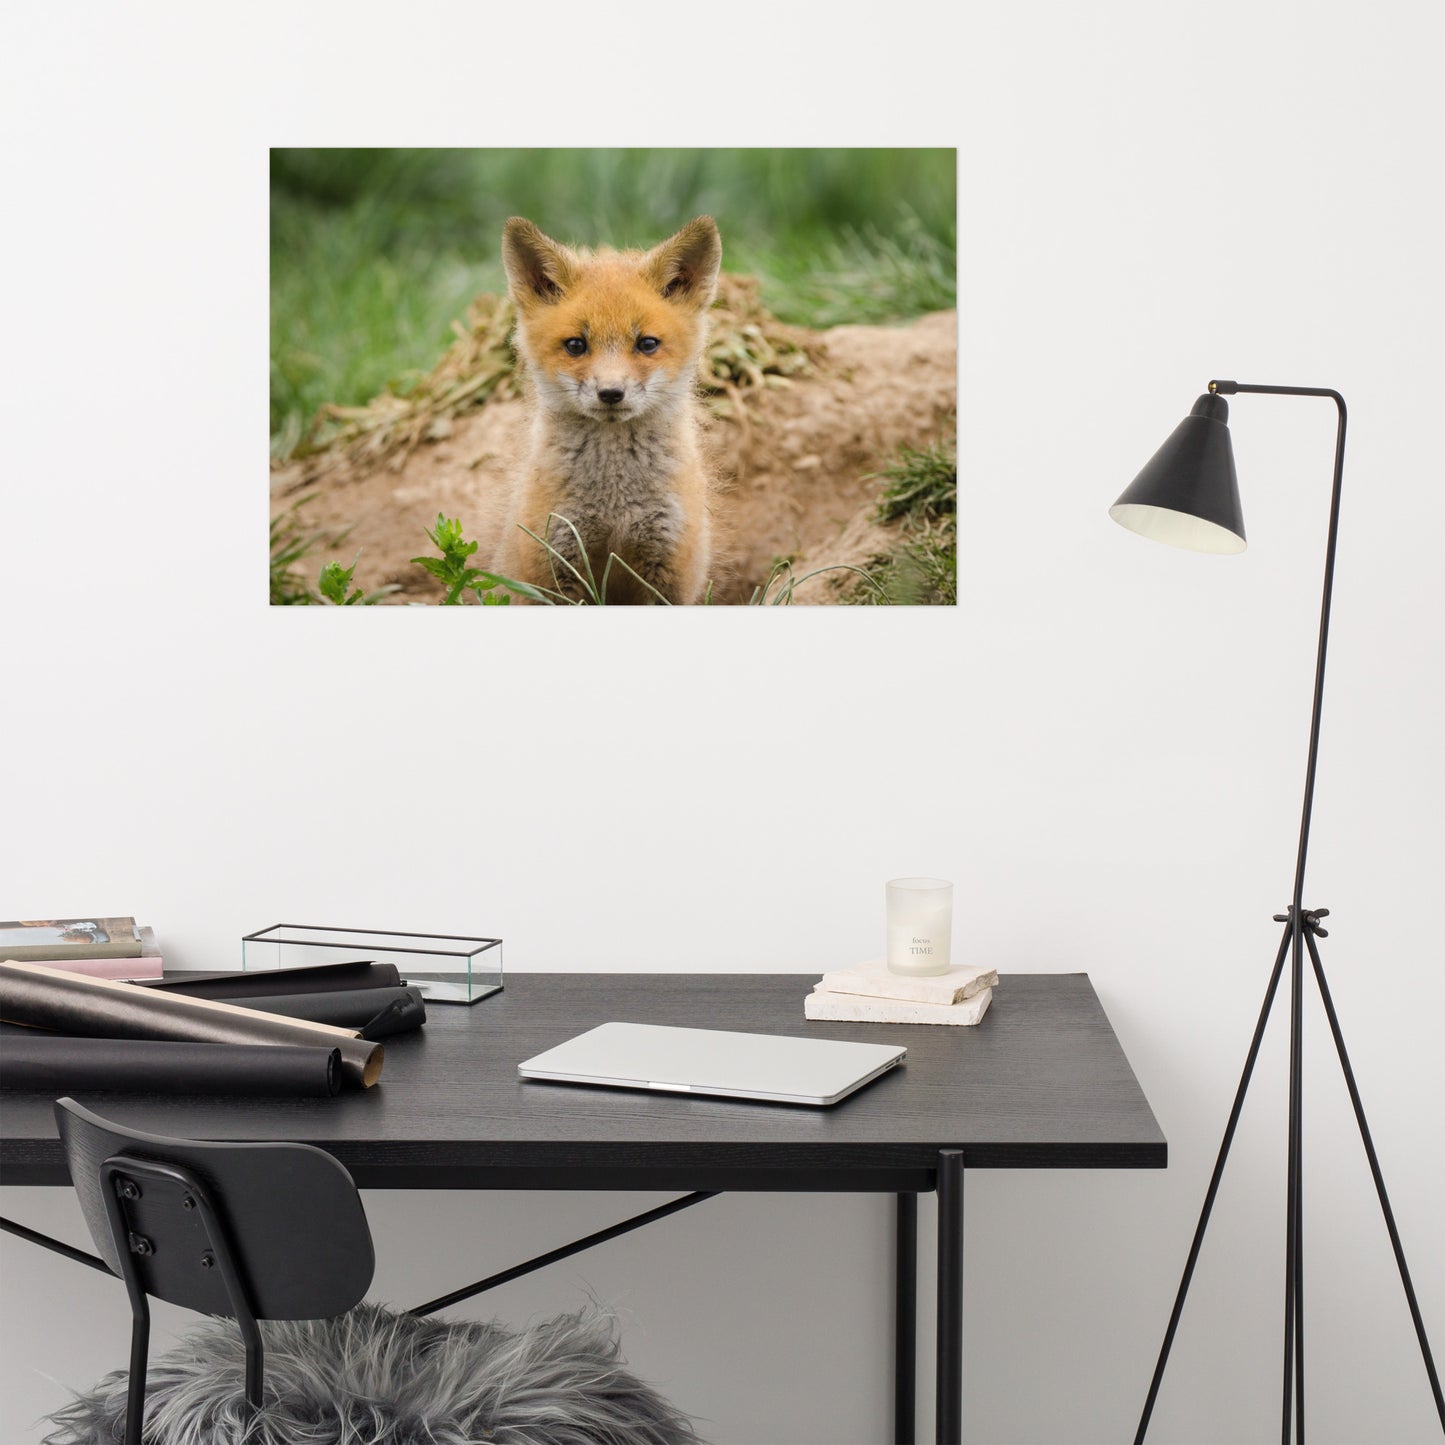 Bathroom Wall Pictures Ideas: Young Red Fox Kit - Animal / Wildlife / Nature Photograph Loose / Unframed / Frameless / Frameable Wall Art Print / Artwork